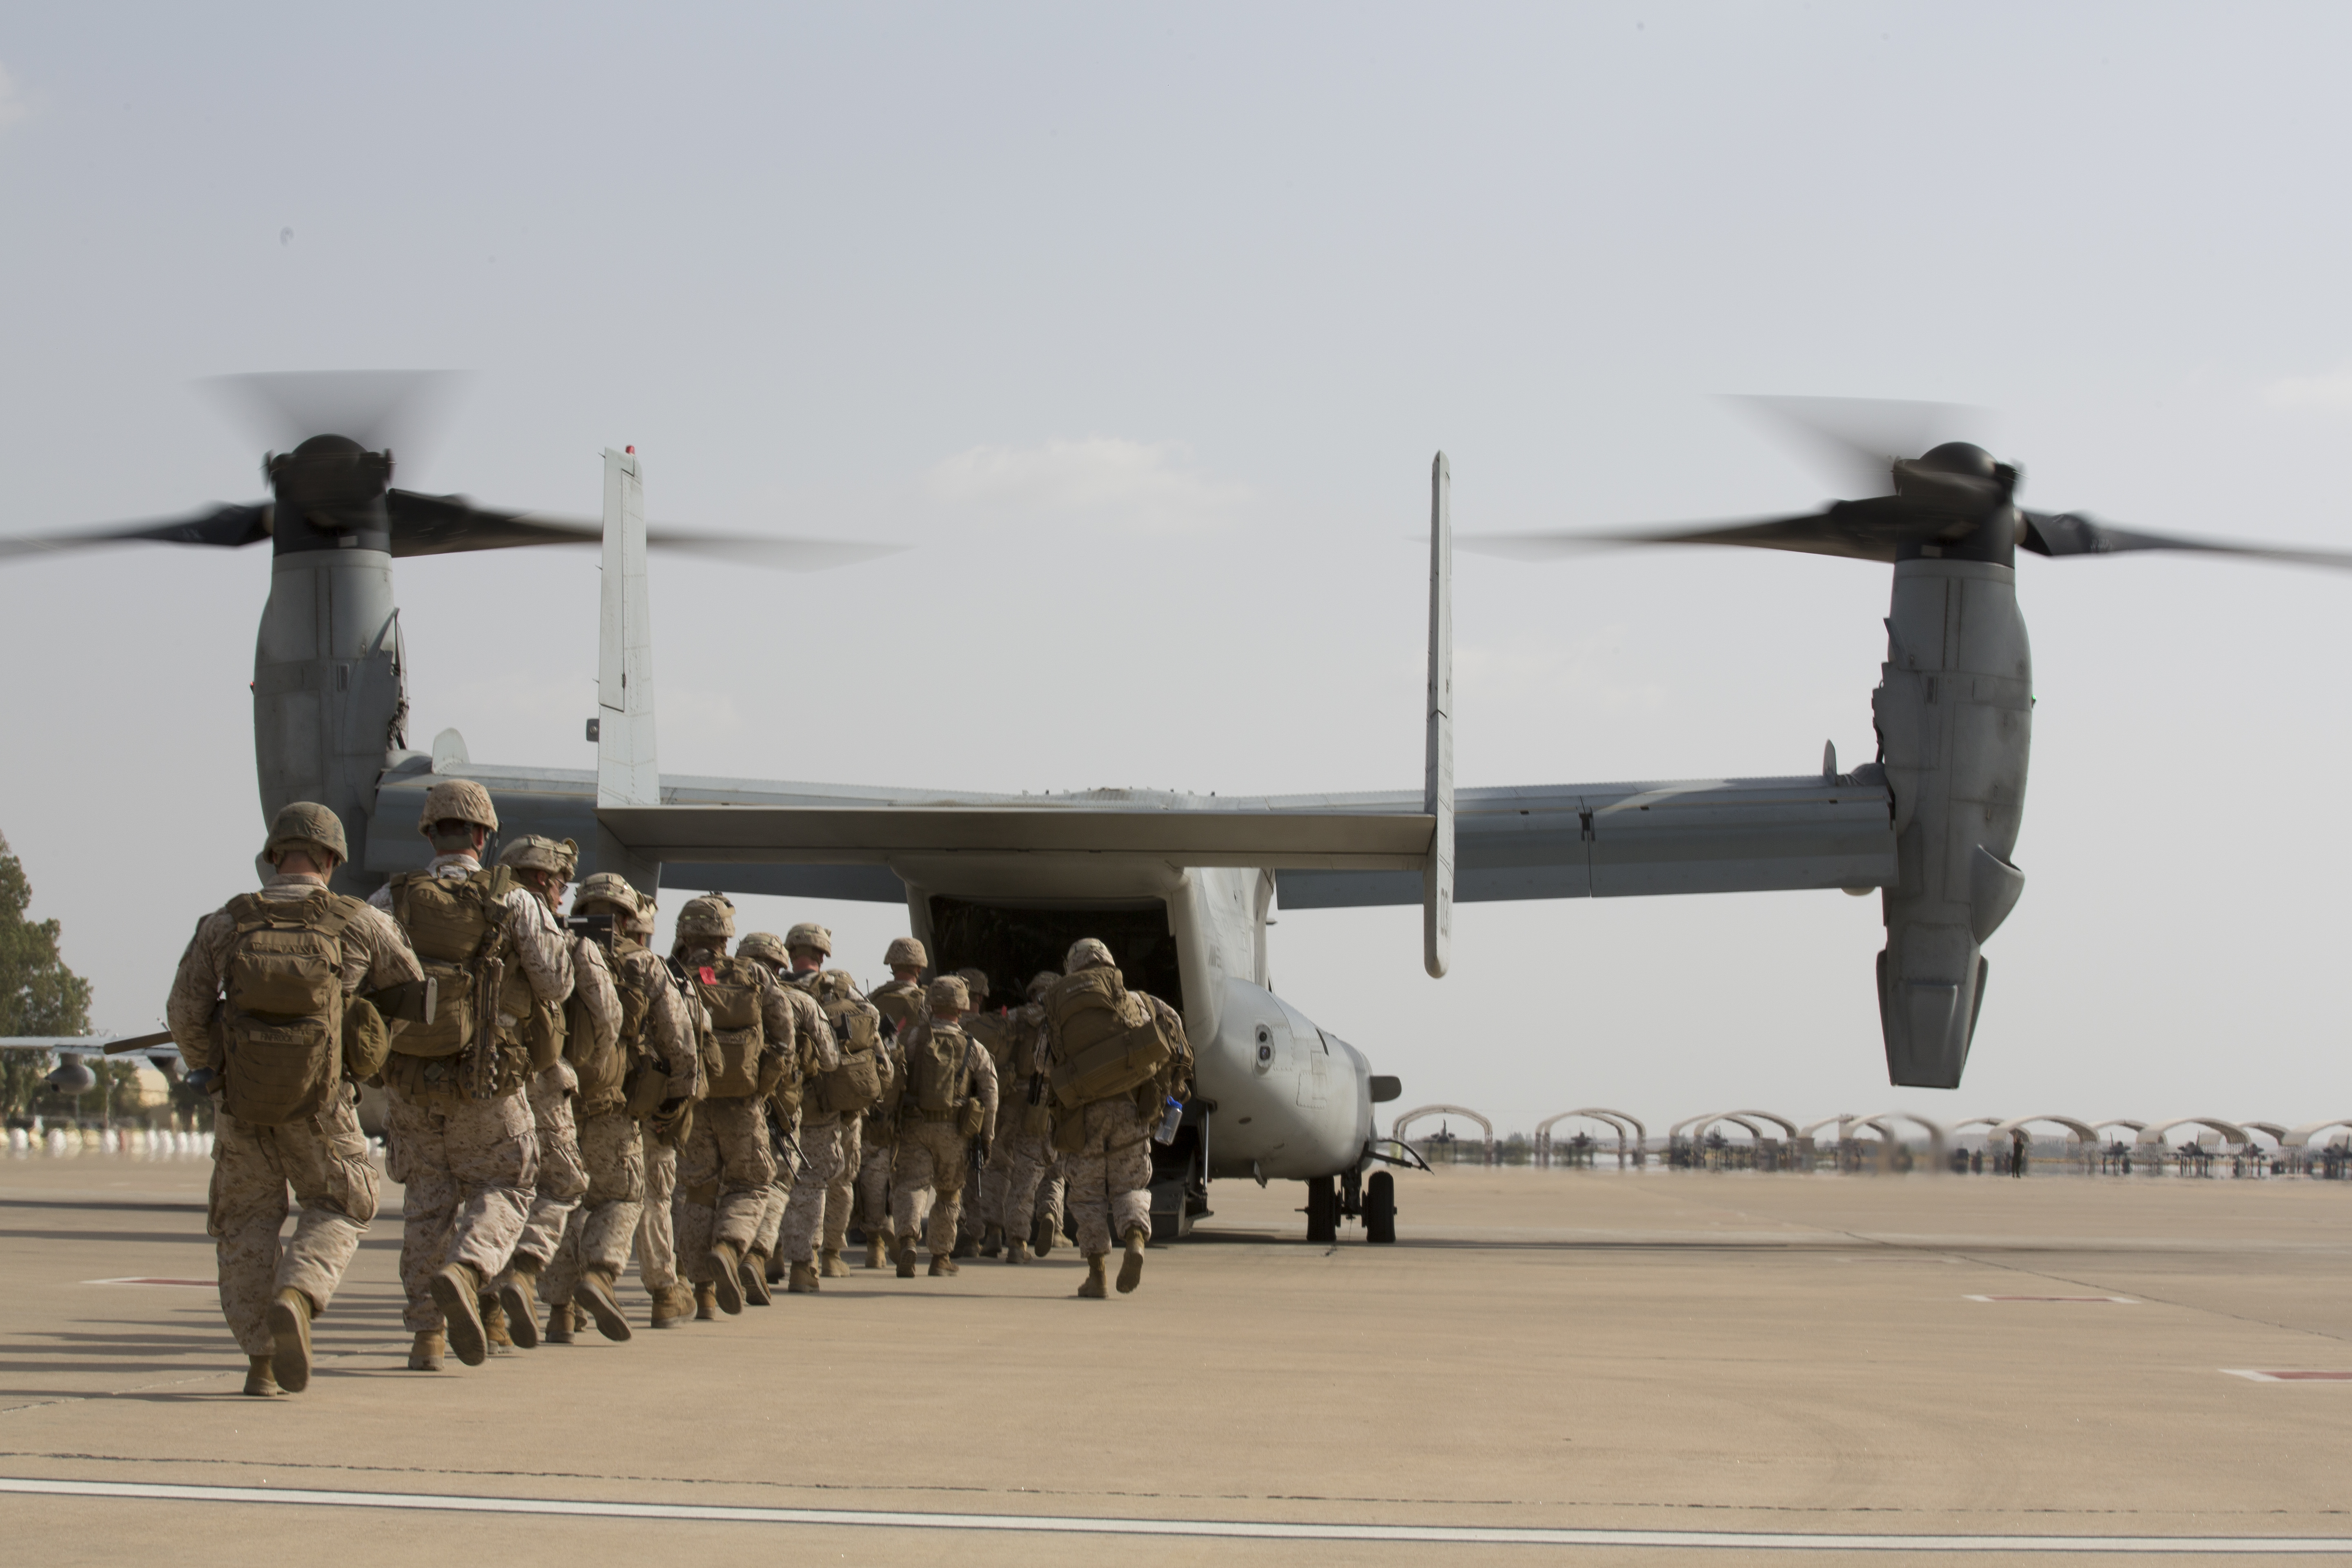 U.S. Marines with Special-Purpose Marine Air-Ground Task Force Crisis Response-Africa (SPMAGTF-CR-AF), board an MV-22B Osprey, during a crisis response drill on Morón Air Base, Spain, Aug. 3, 2015. The crisis response force’s mission requires them to have Marines ready to respond within six hours of an alert in support U.S. Africa Command. US Marine Corps photo.